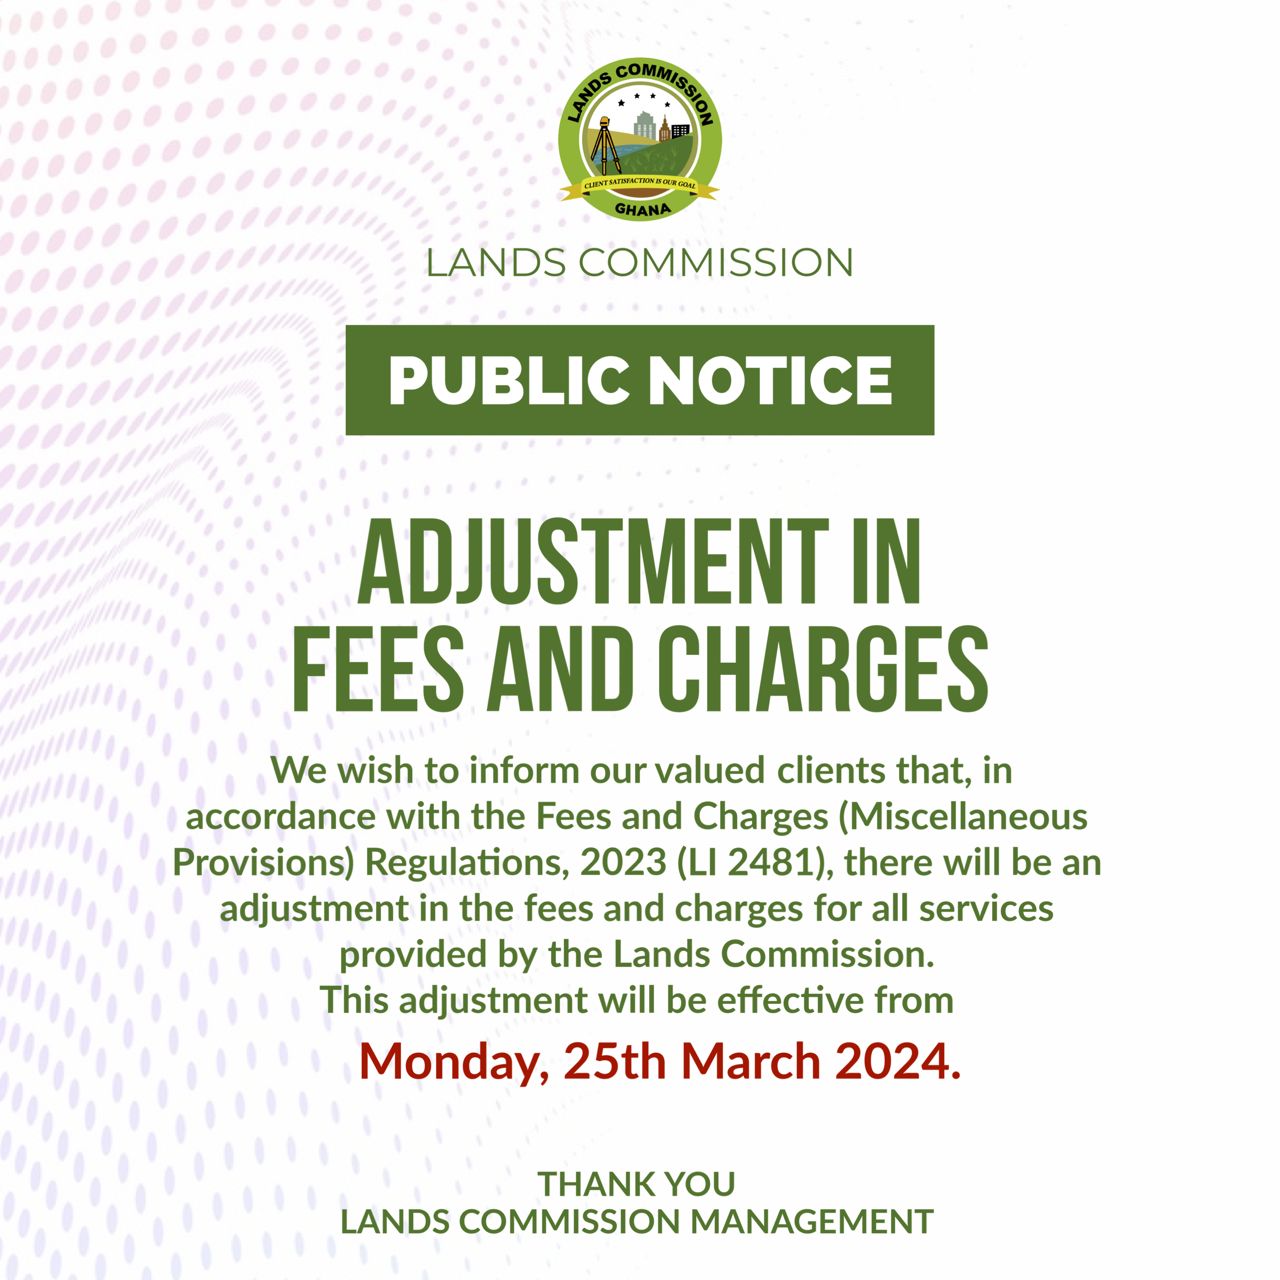 Adjustment in fees and charges